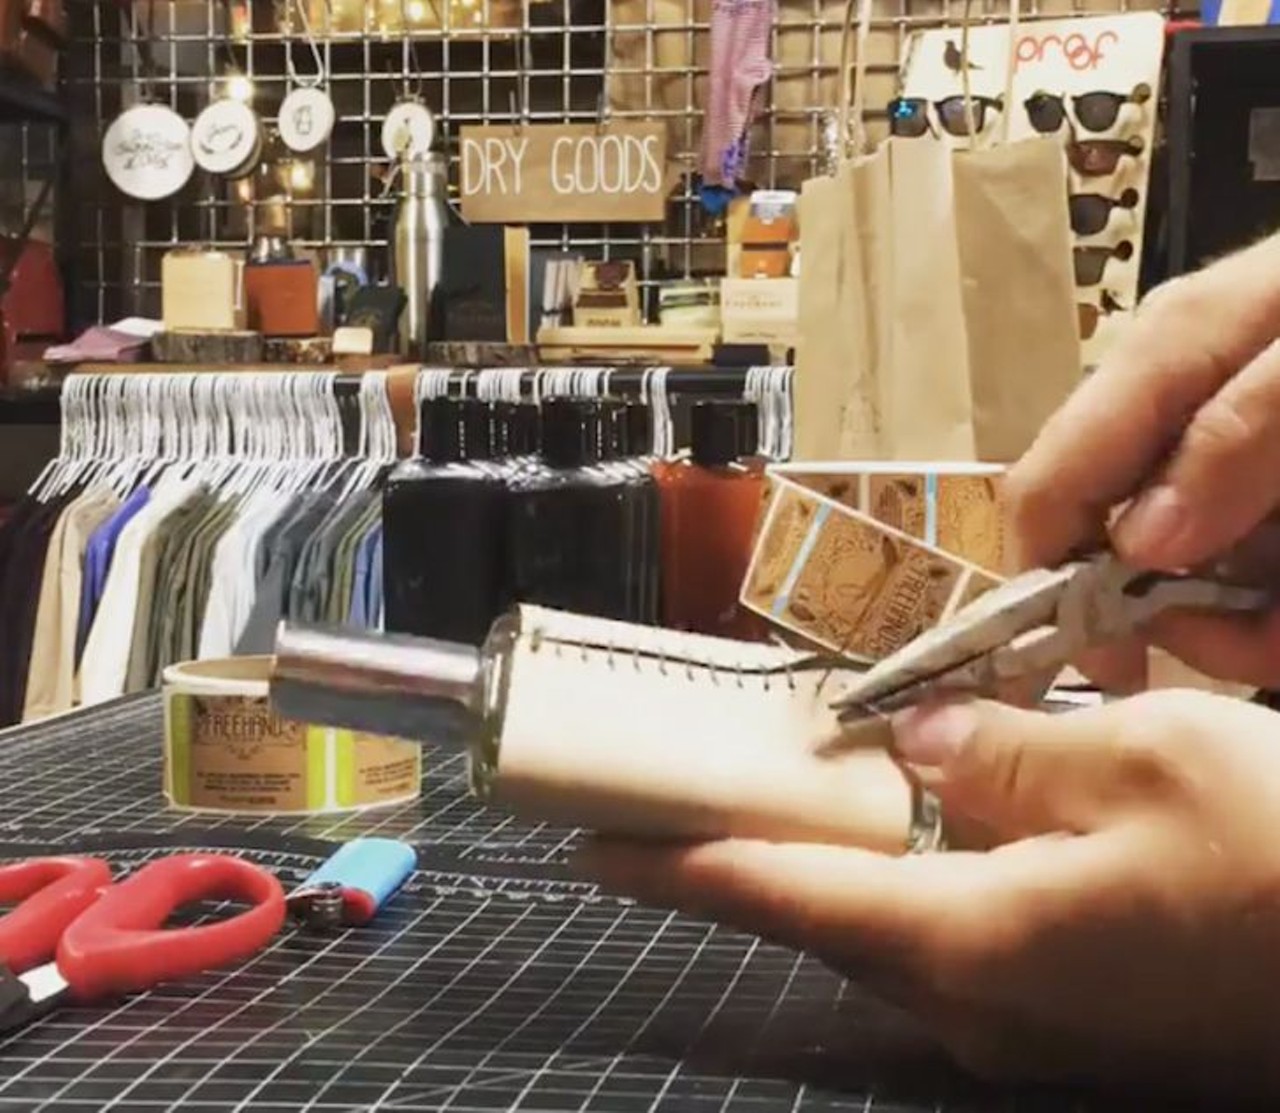 Freehand Goods  
What started as a company that made quality leather wallets at an affordable price has quickly extended into bags, grooming products, T-shirts and more. All of their quality products are hand-cut, hand-sewn, hand-poured or hand-made.
Photo via freehandgoods / Instagram